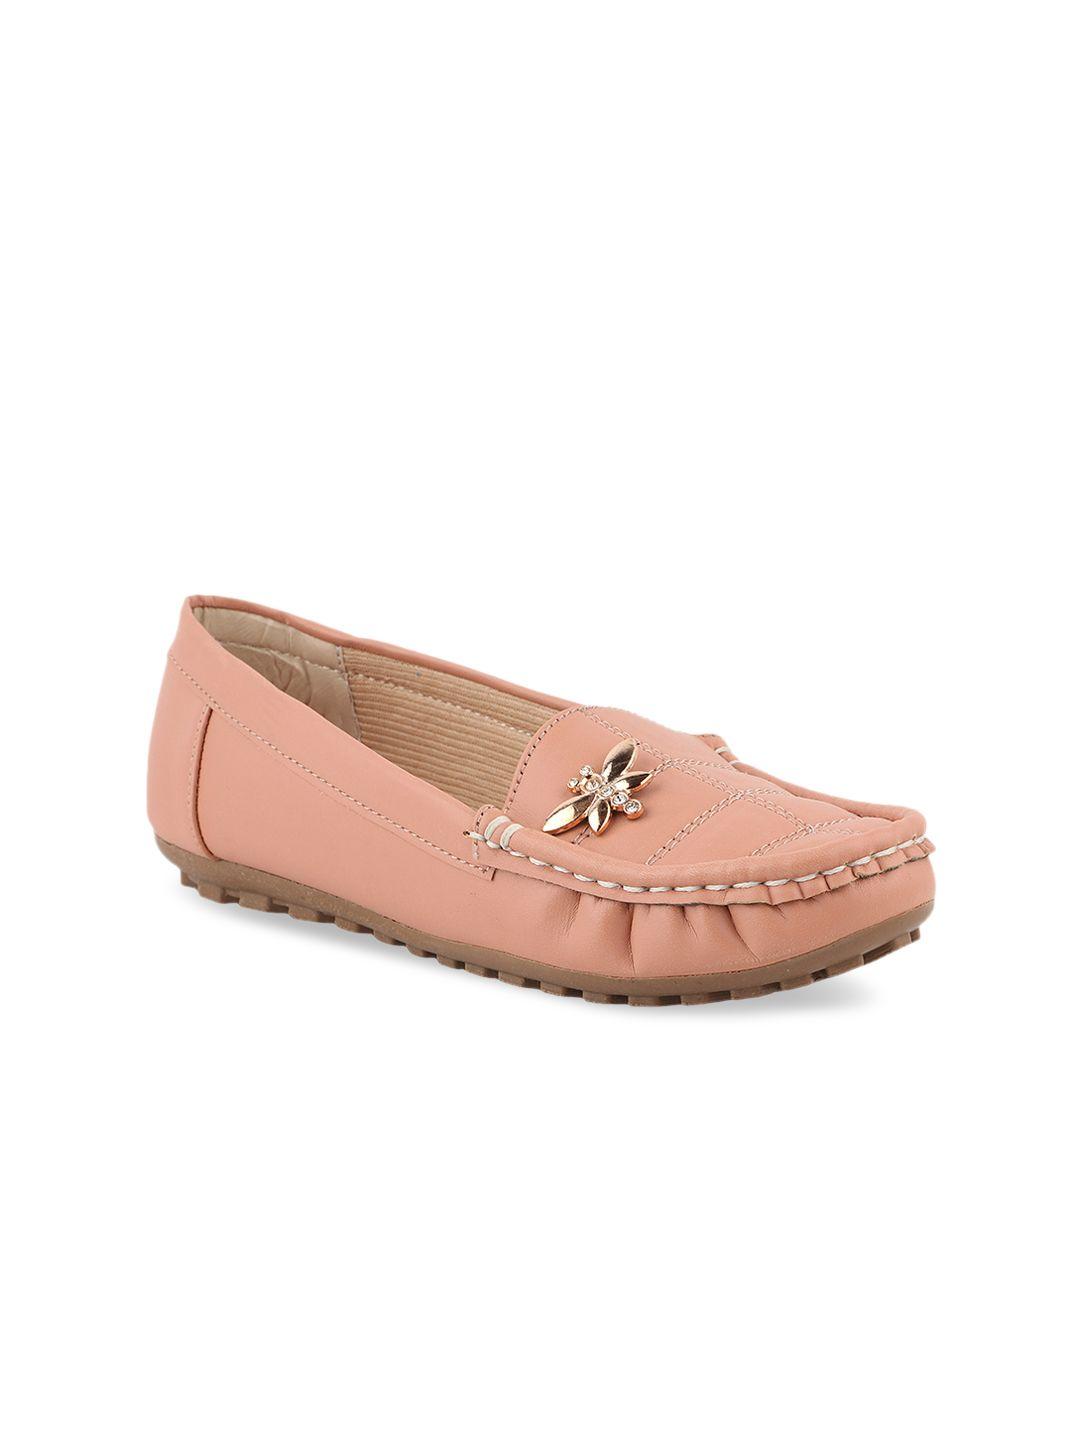 pery pao women textured ballerinas with bows flats